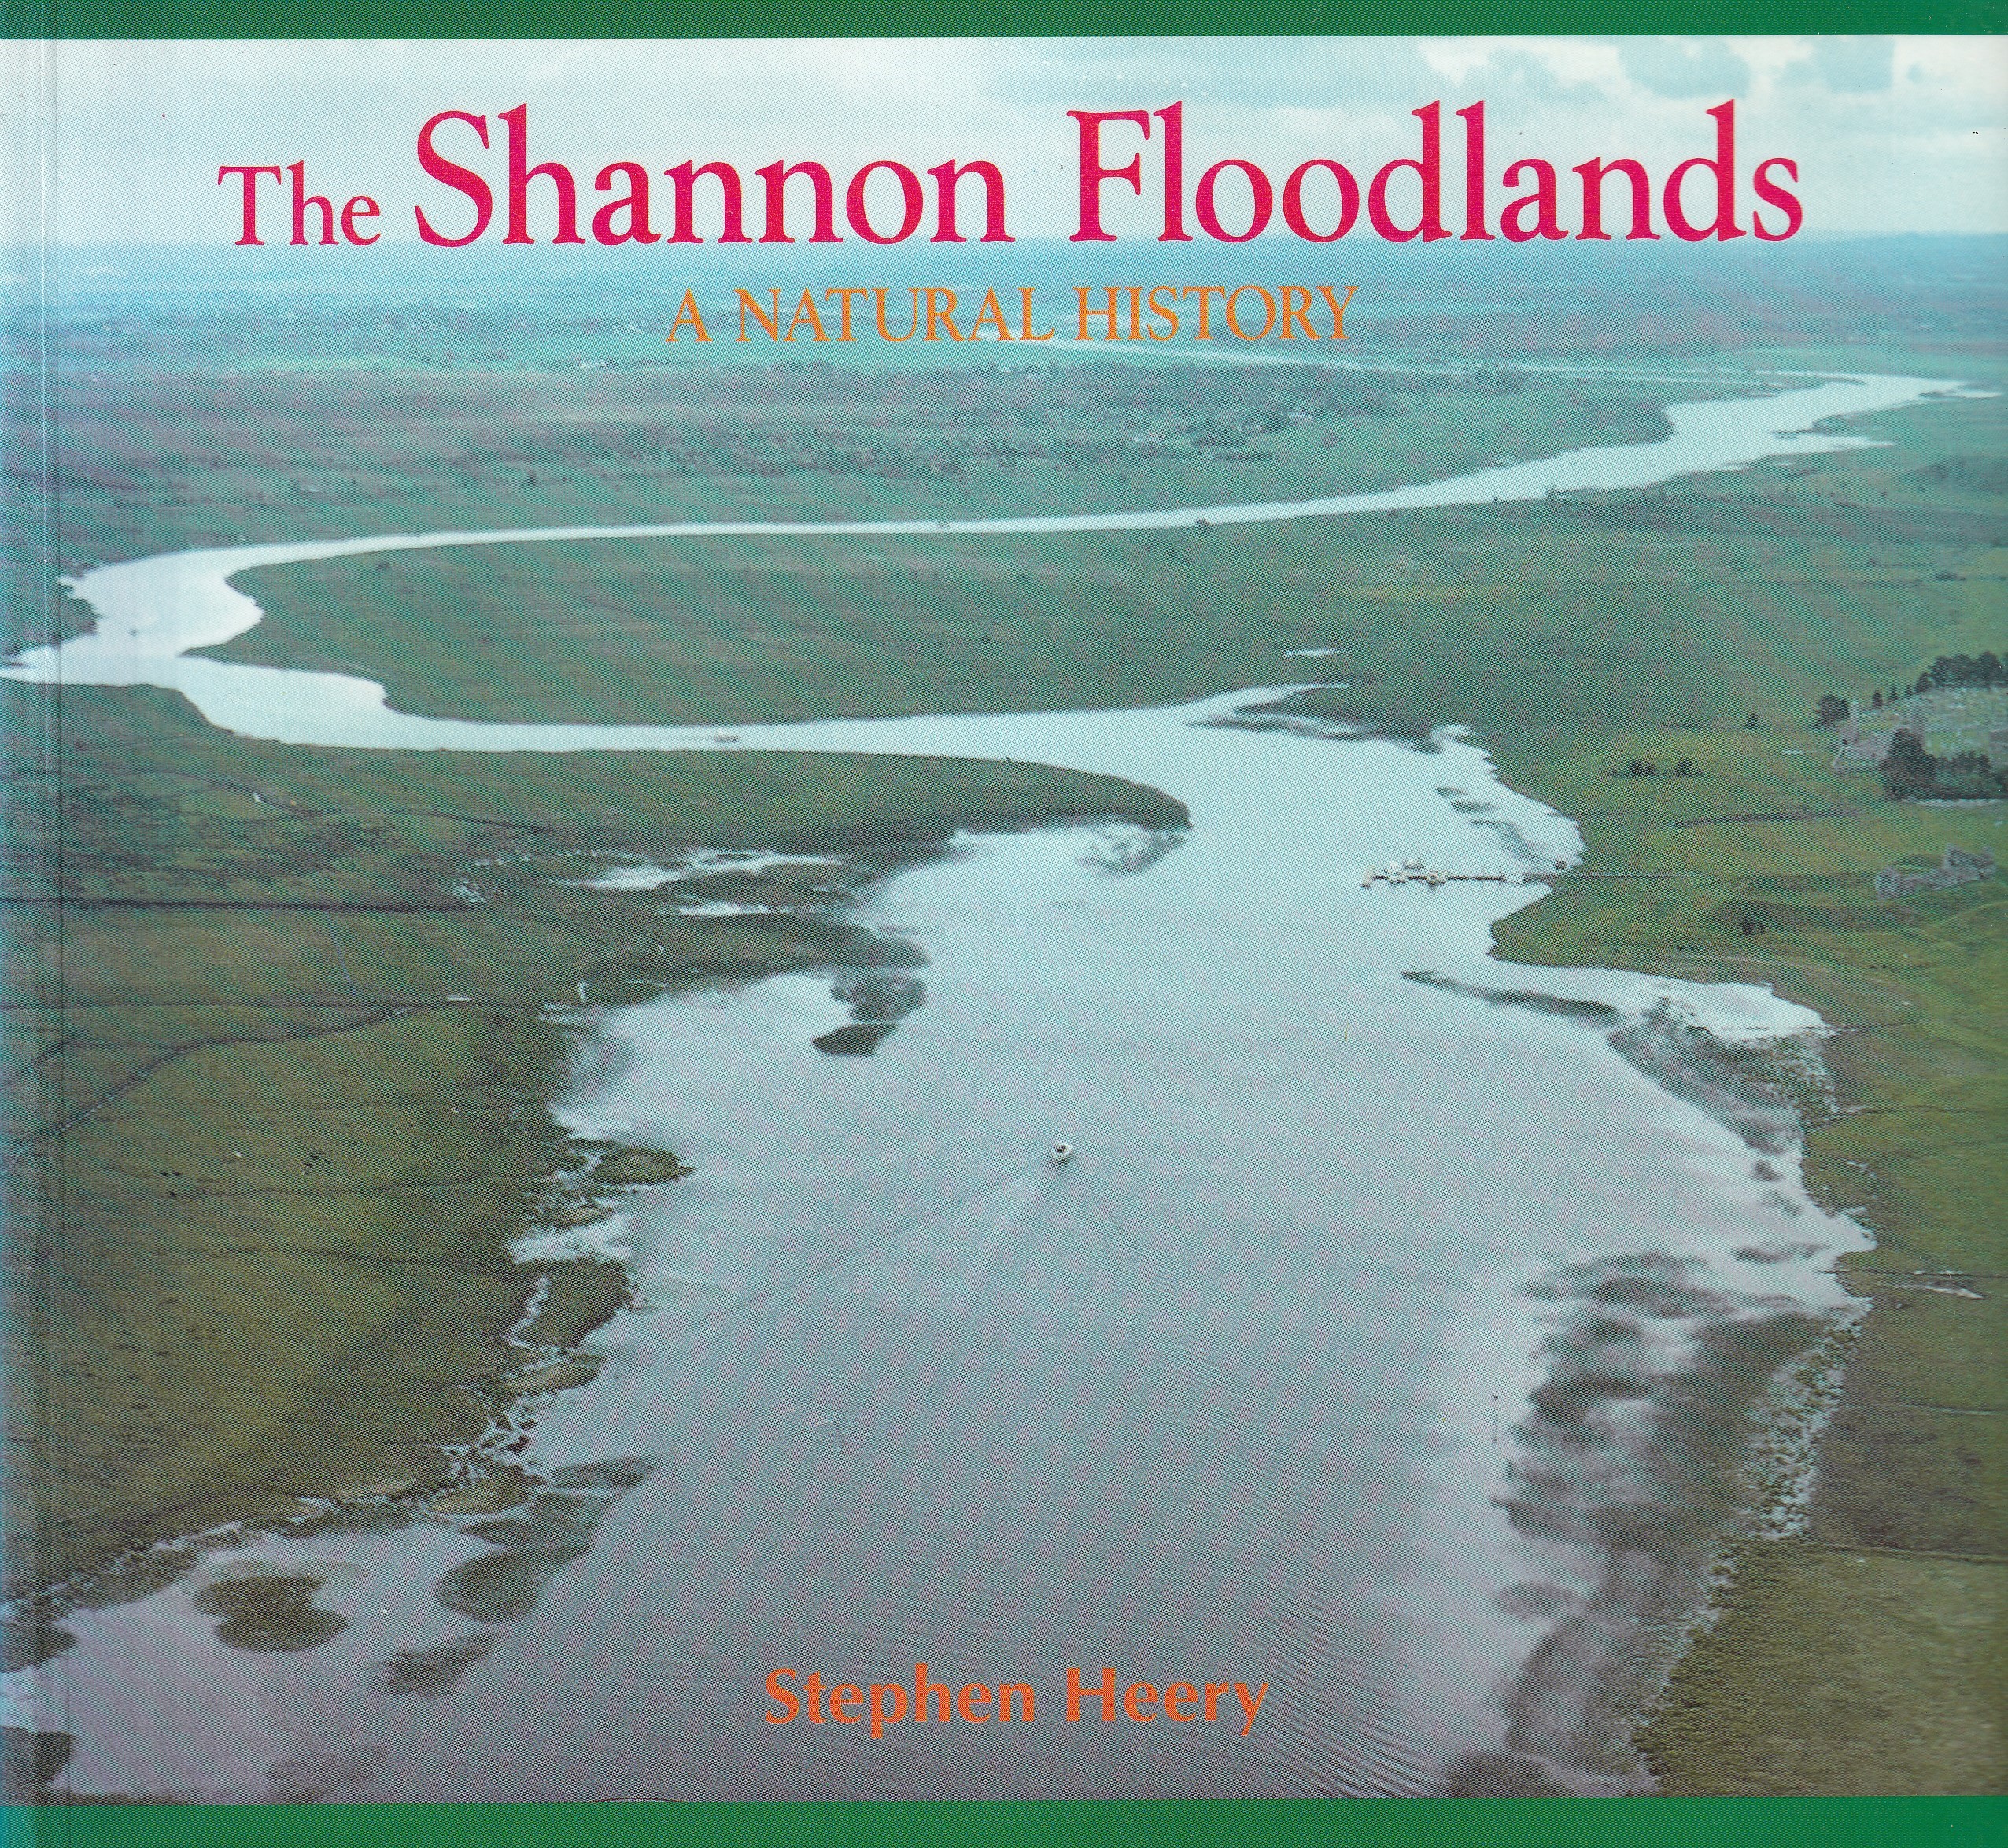 The Shannon Floodlands: A Natural History | Stephen Heery | Charlie Byrne's